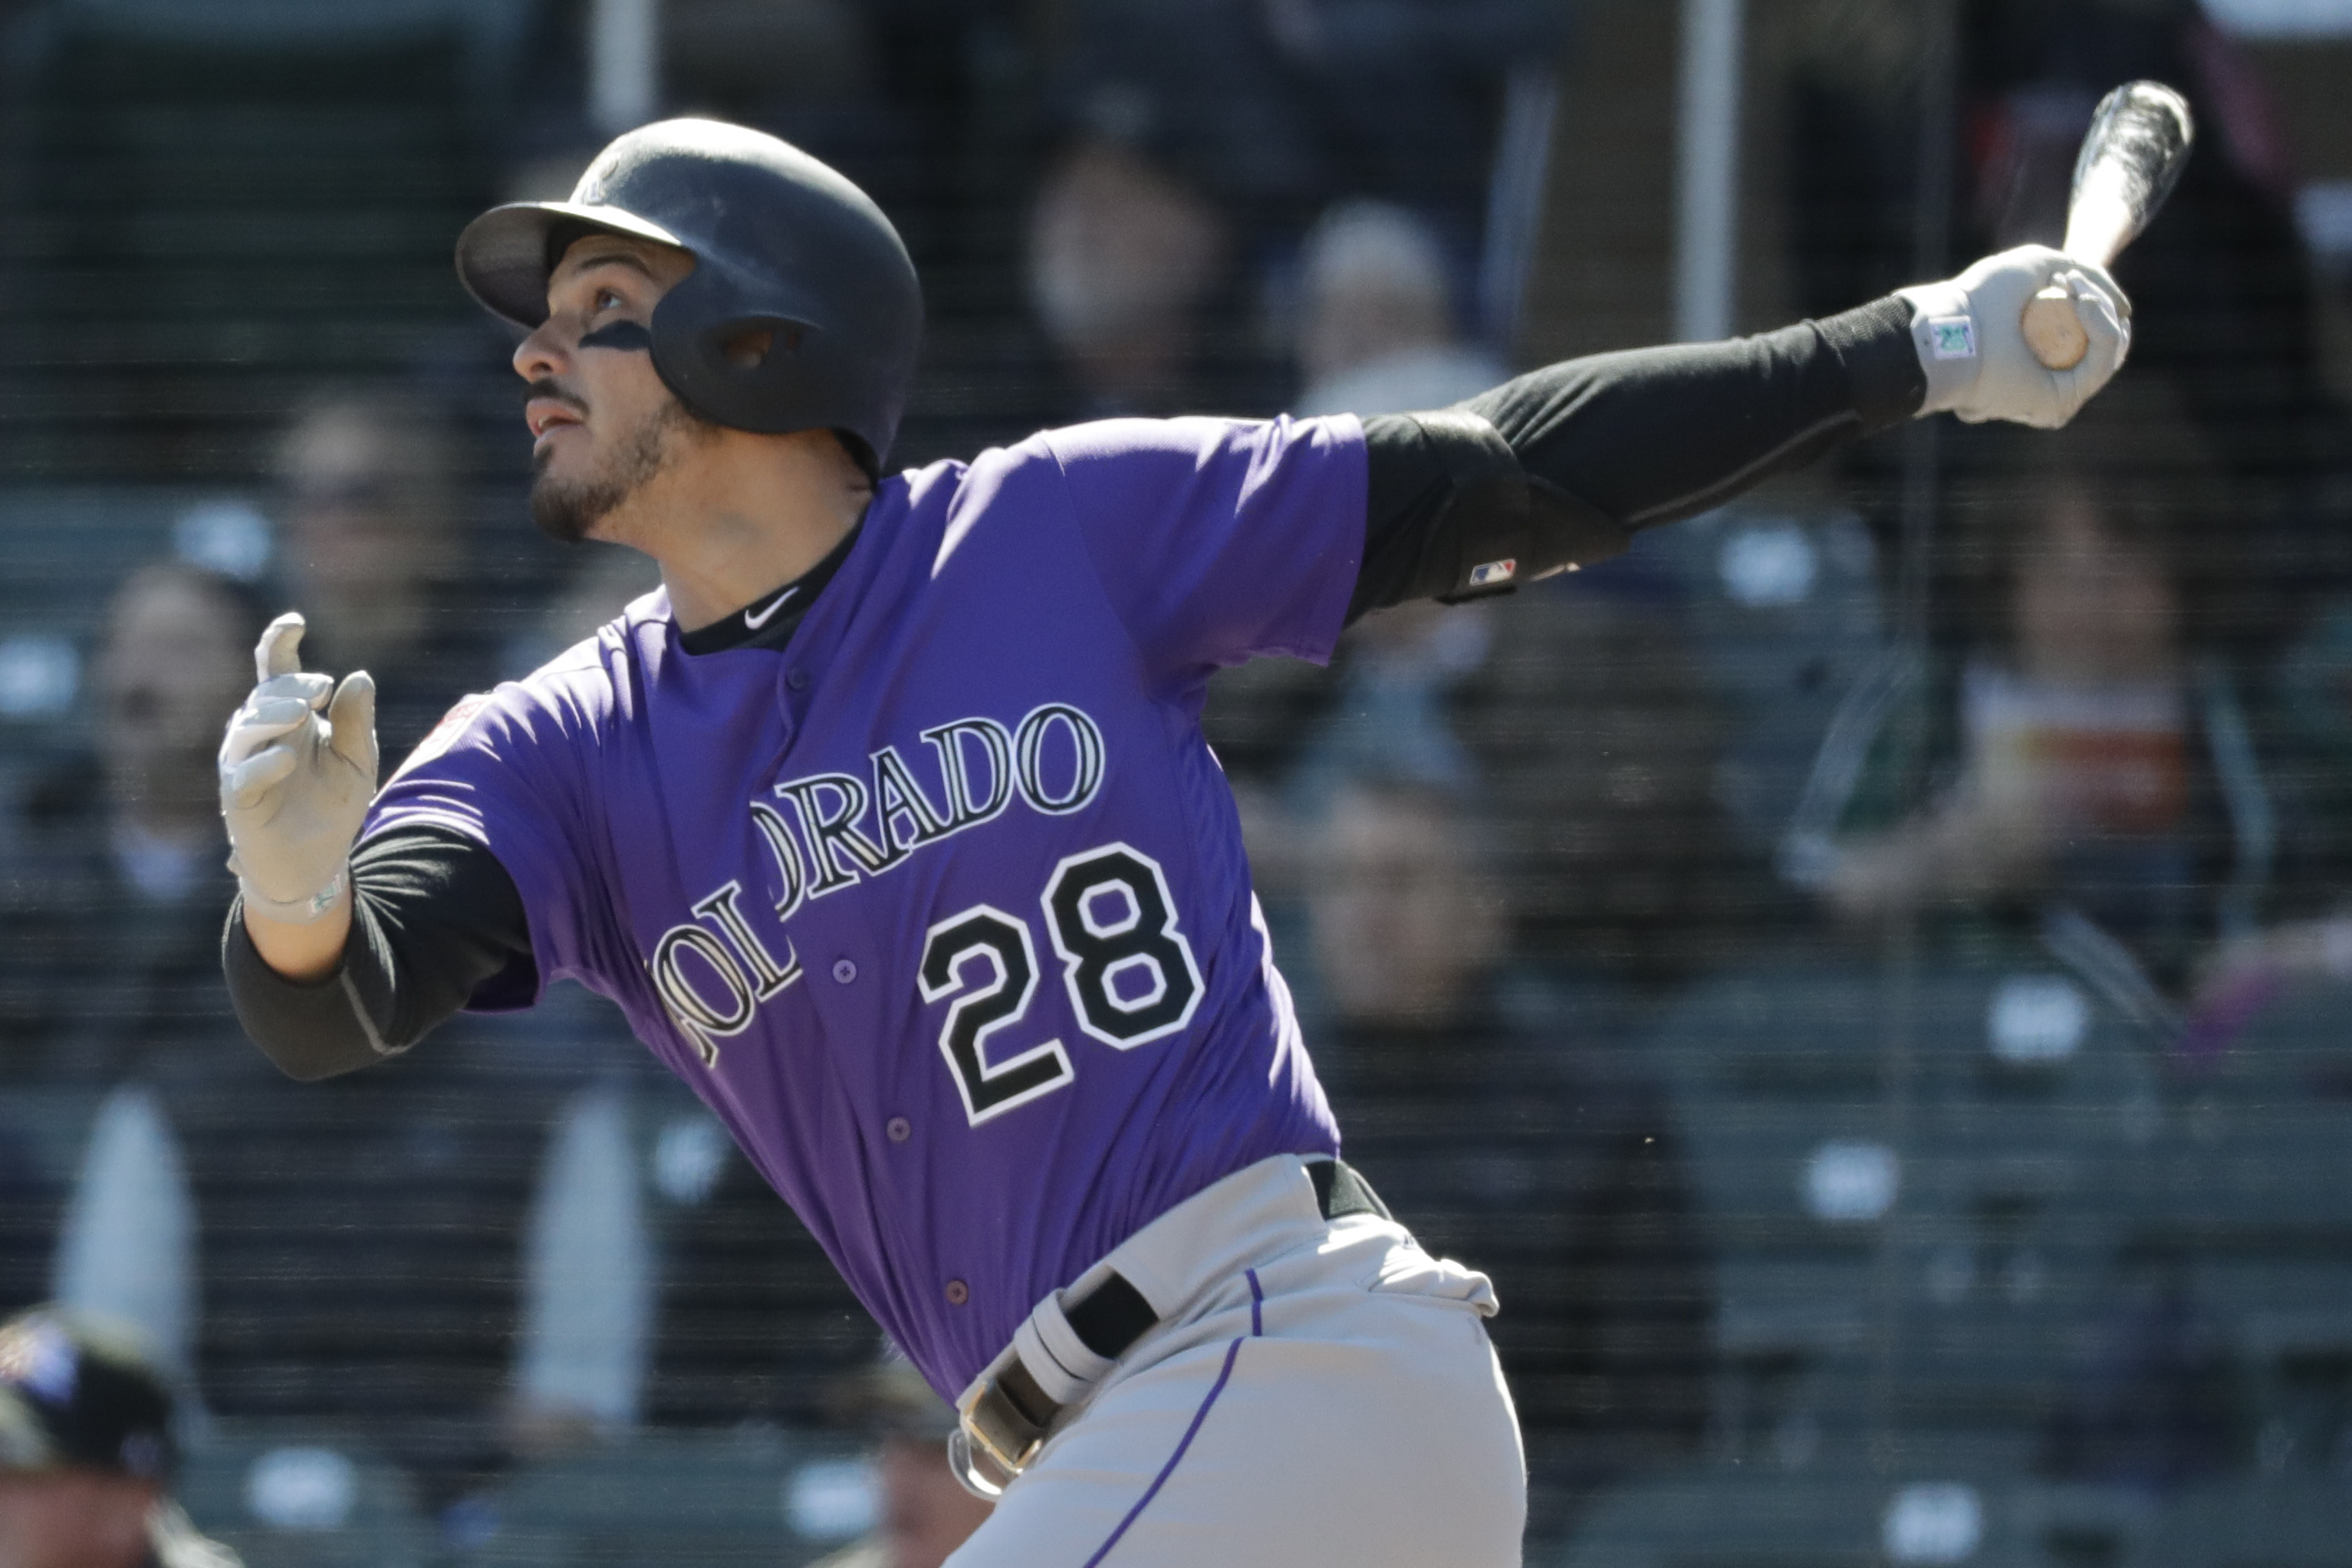 Nolan Arenado fulfilling what many with Rockies expected: 'To be great